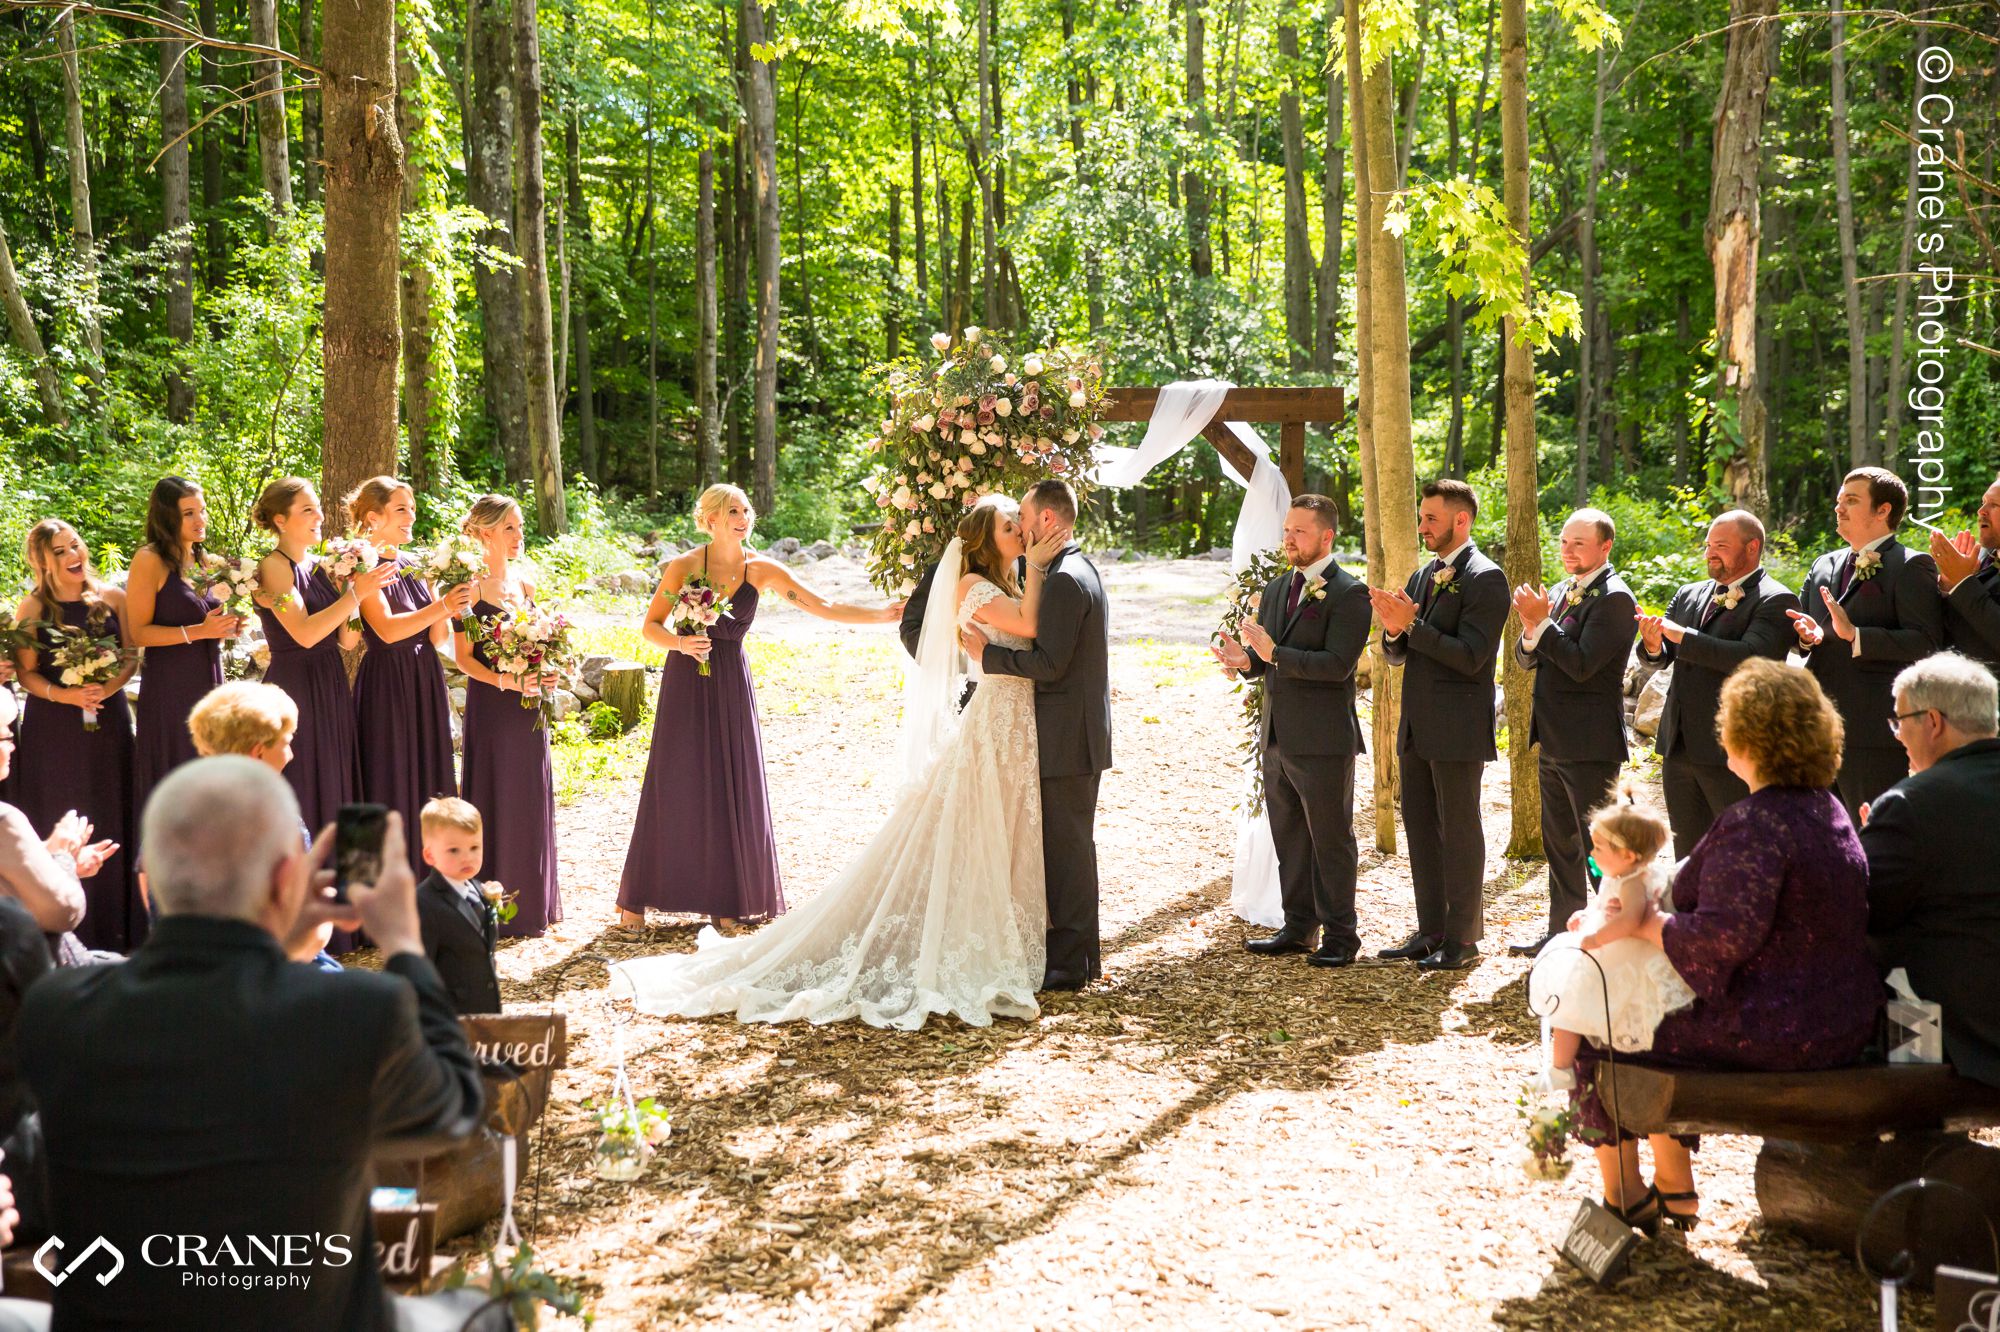 Bride and groom's first kiss as husband and wife at the wedding at The Swan Barn Door